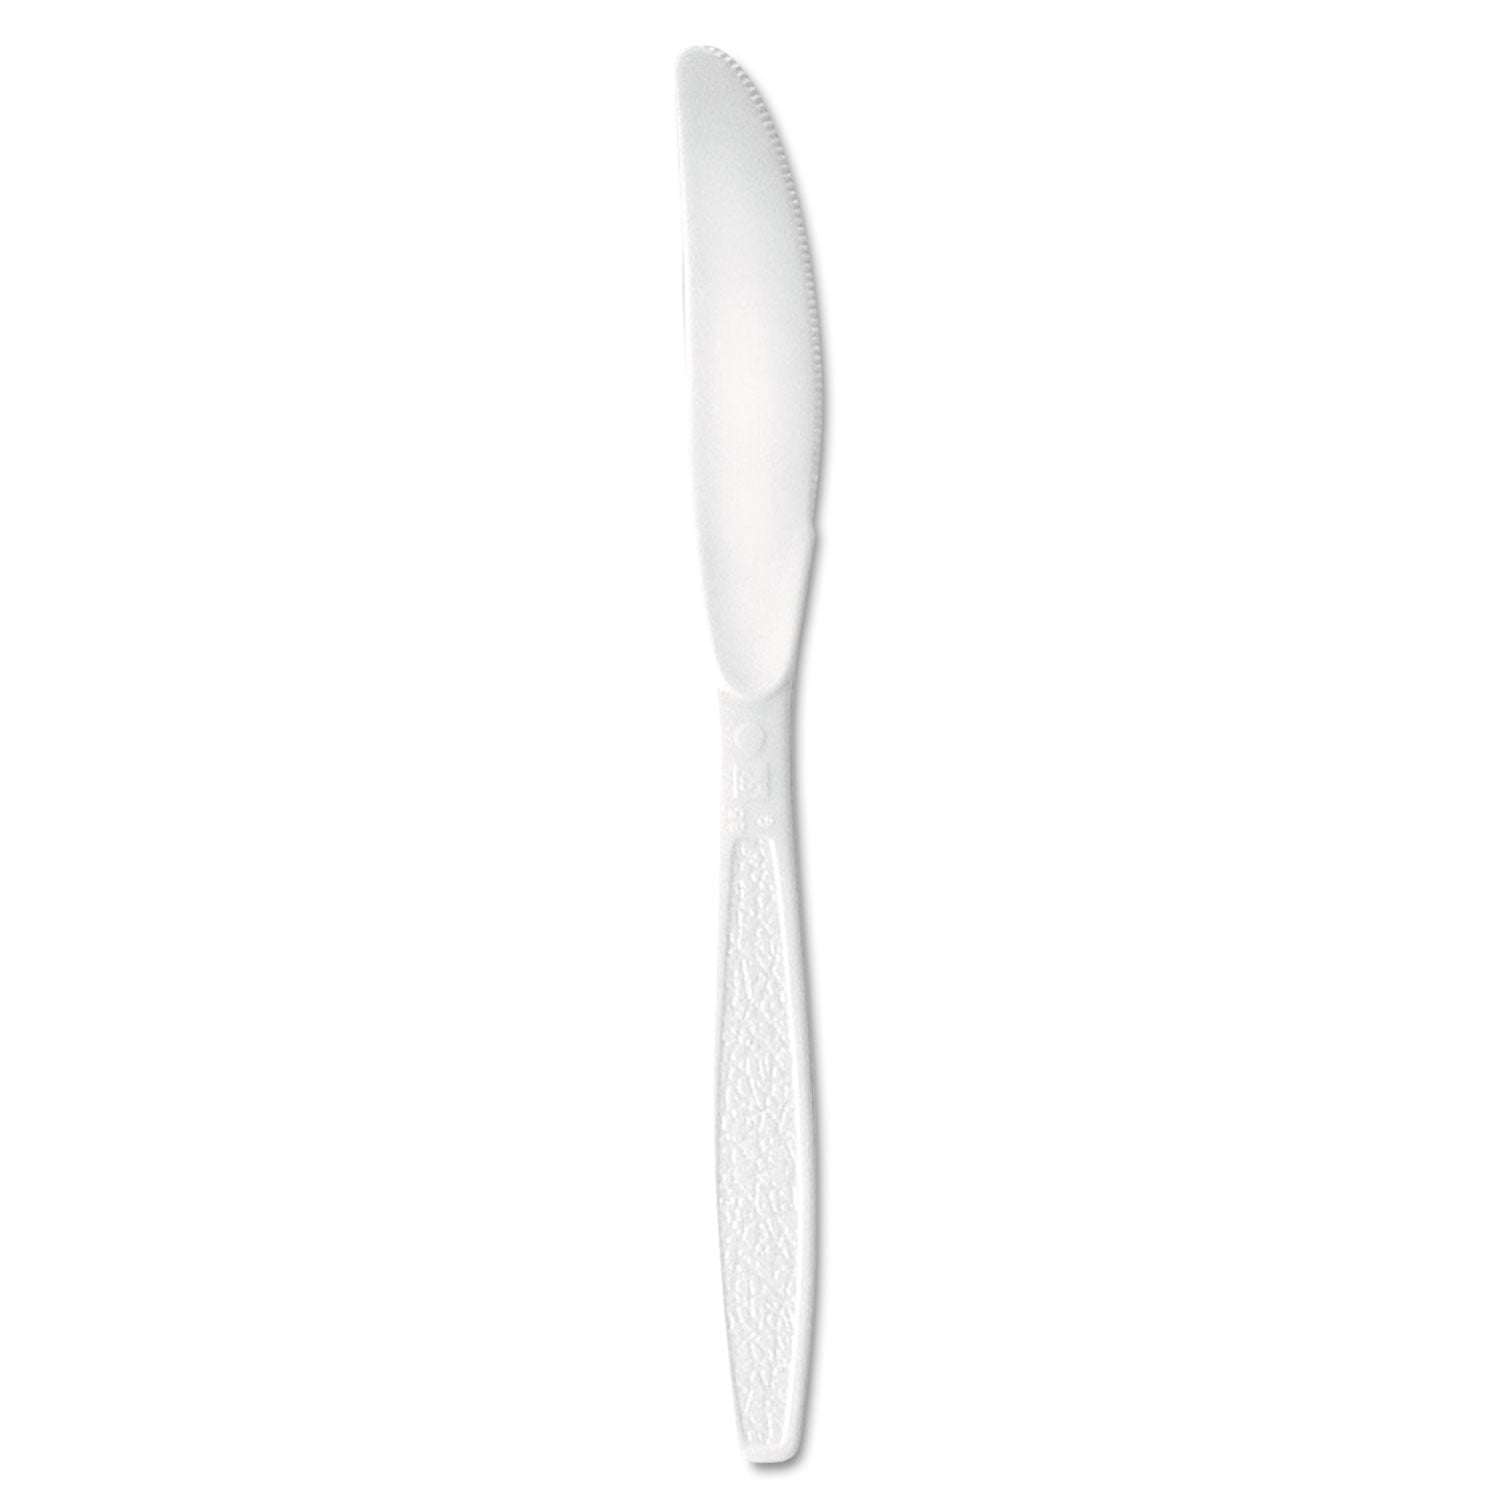 guildware-extra-heavyweight-plastic-cutlery-knives-white-bulk-1000-carton_sccgd6kw - 1